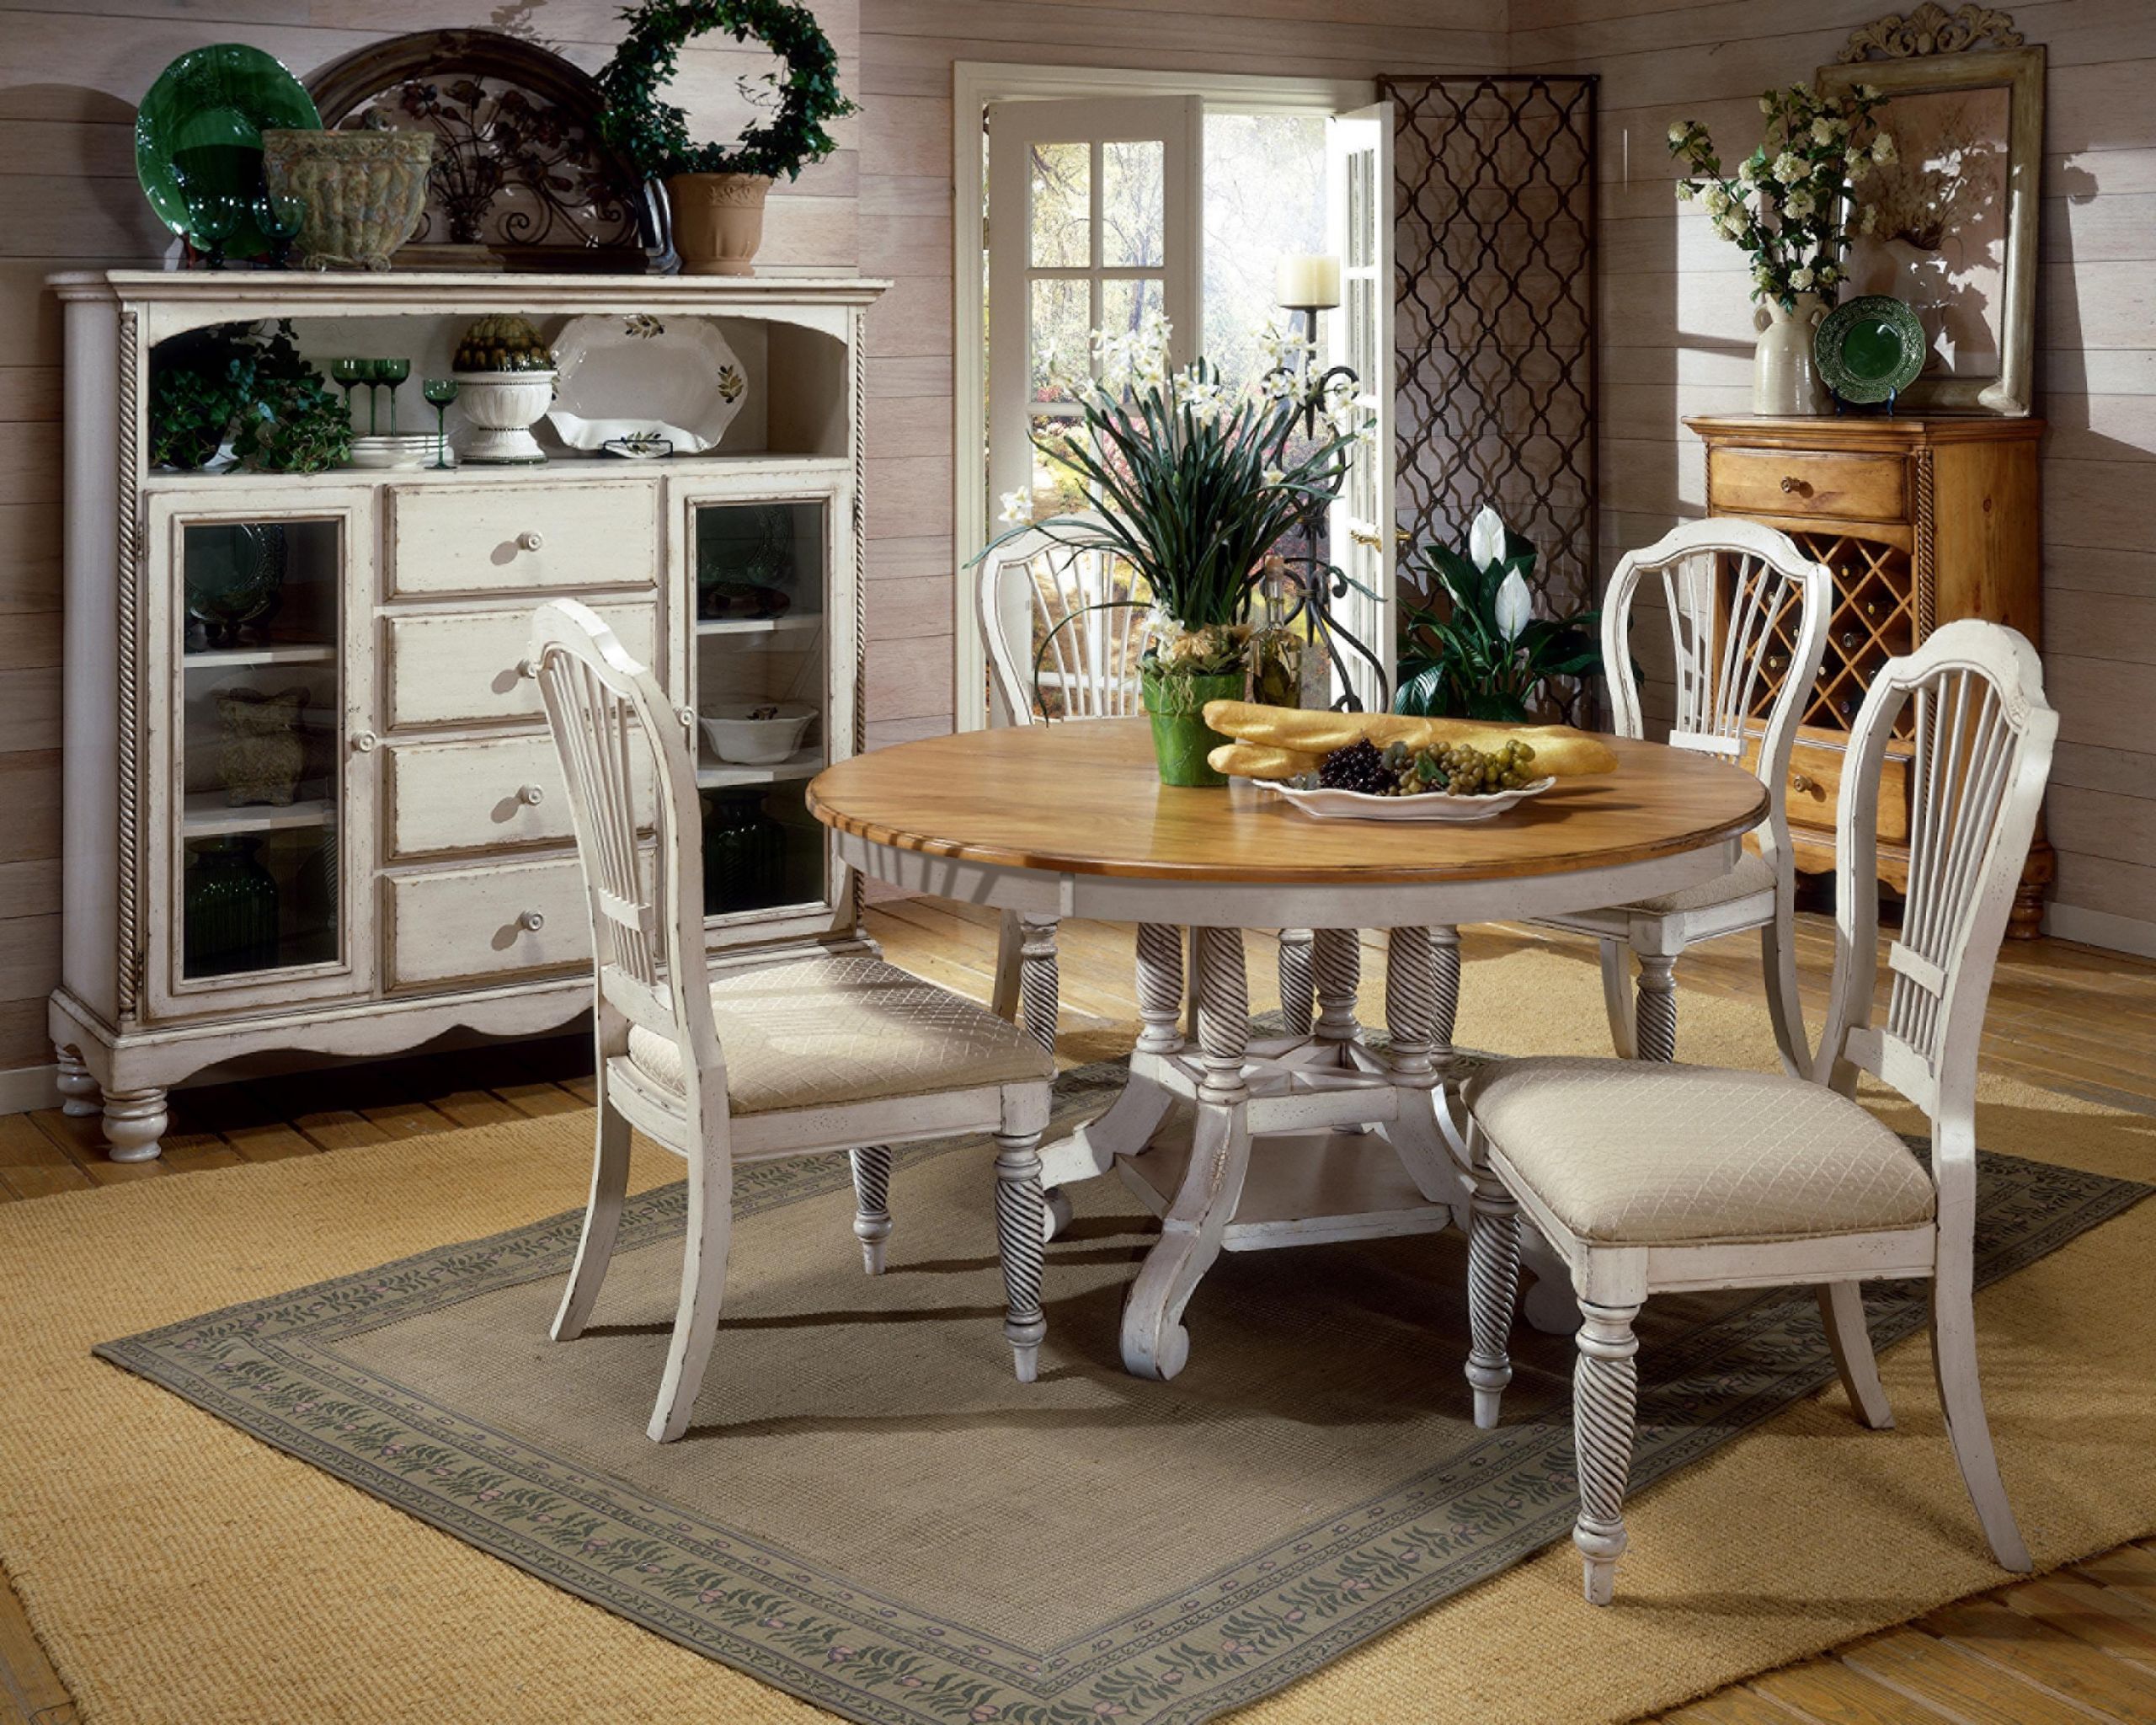 Round White Kitchen Table Sets
 Beautiful White Round Kitchen Table and Chairs – HomesFeed